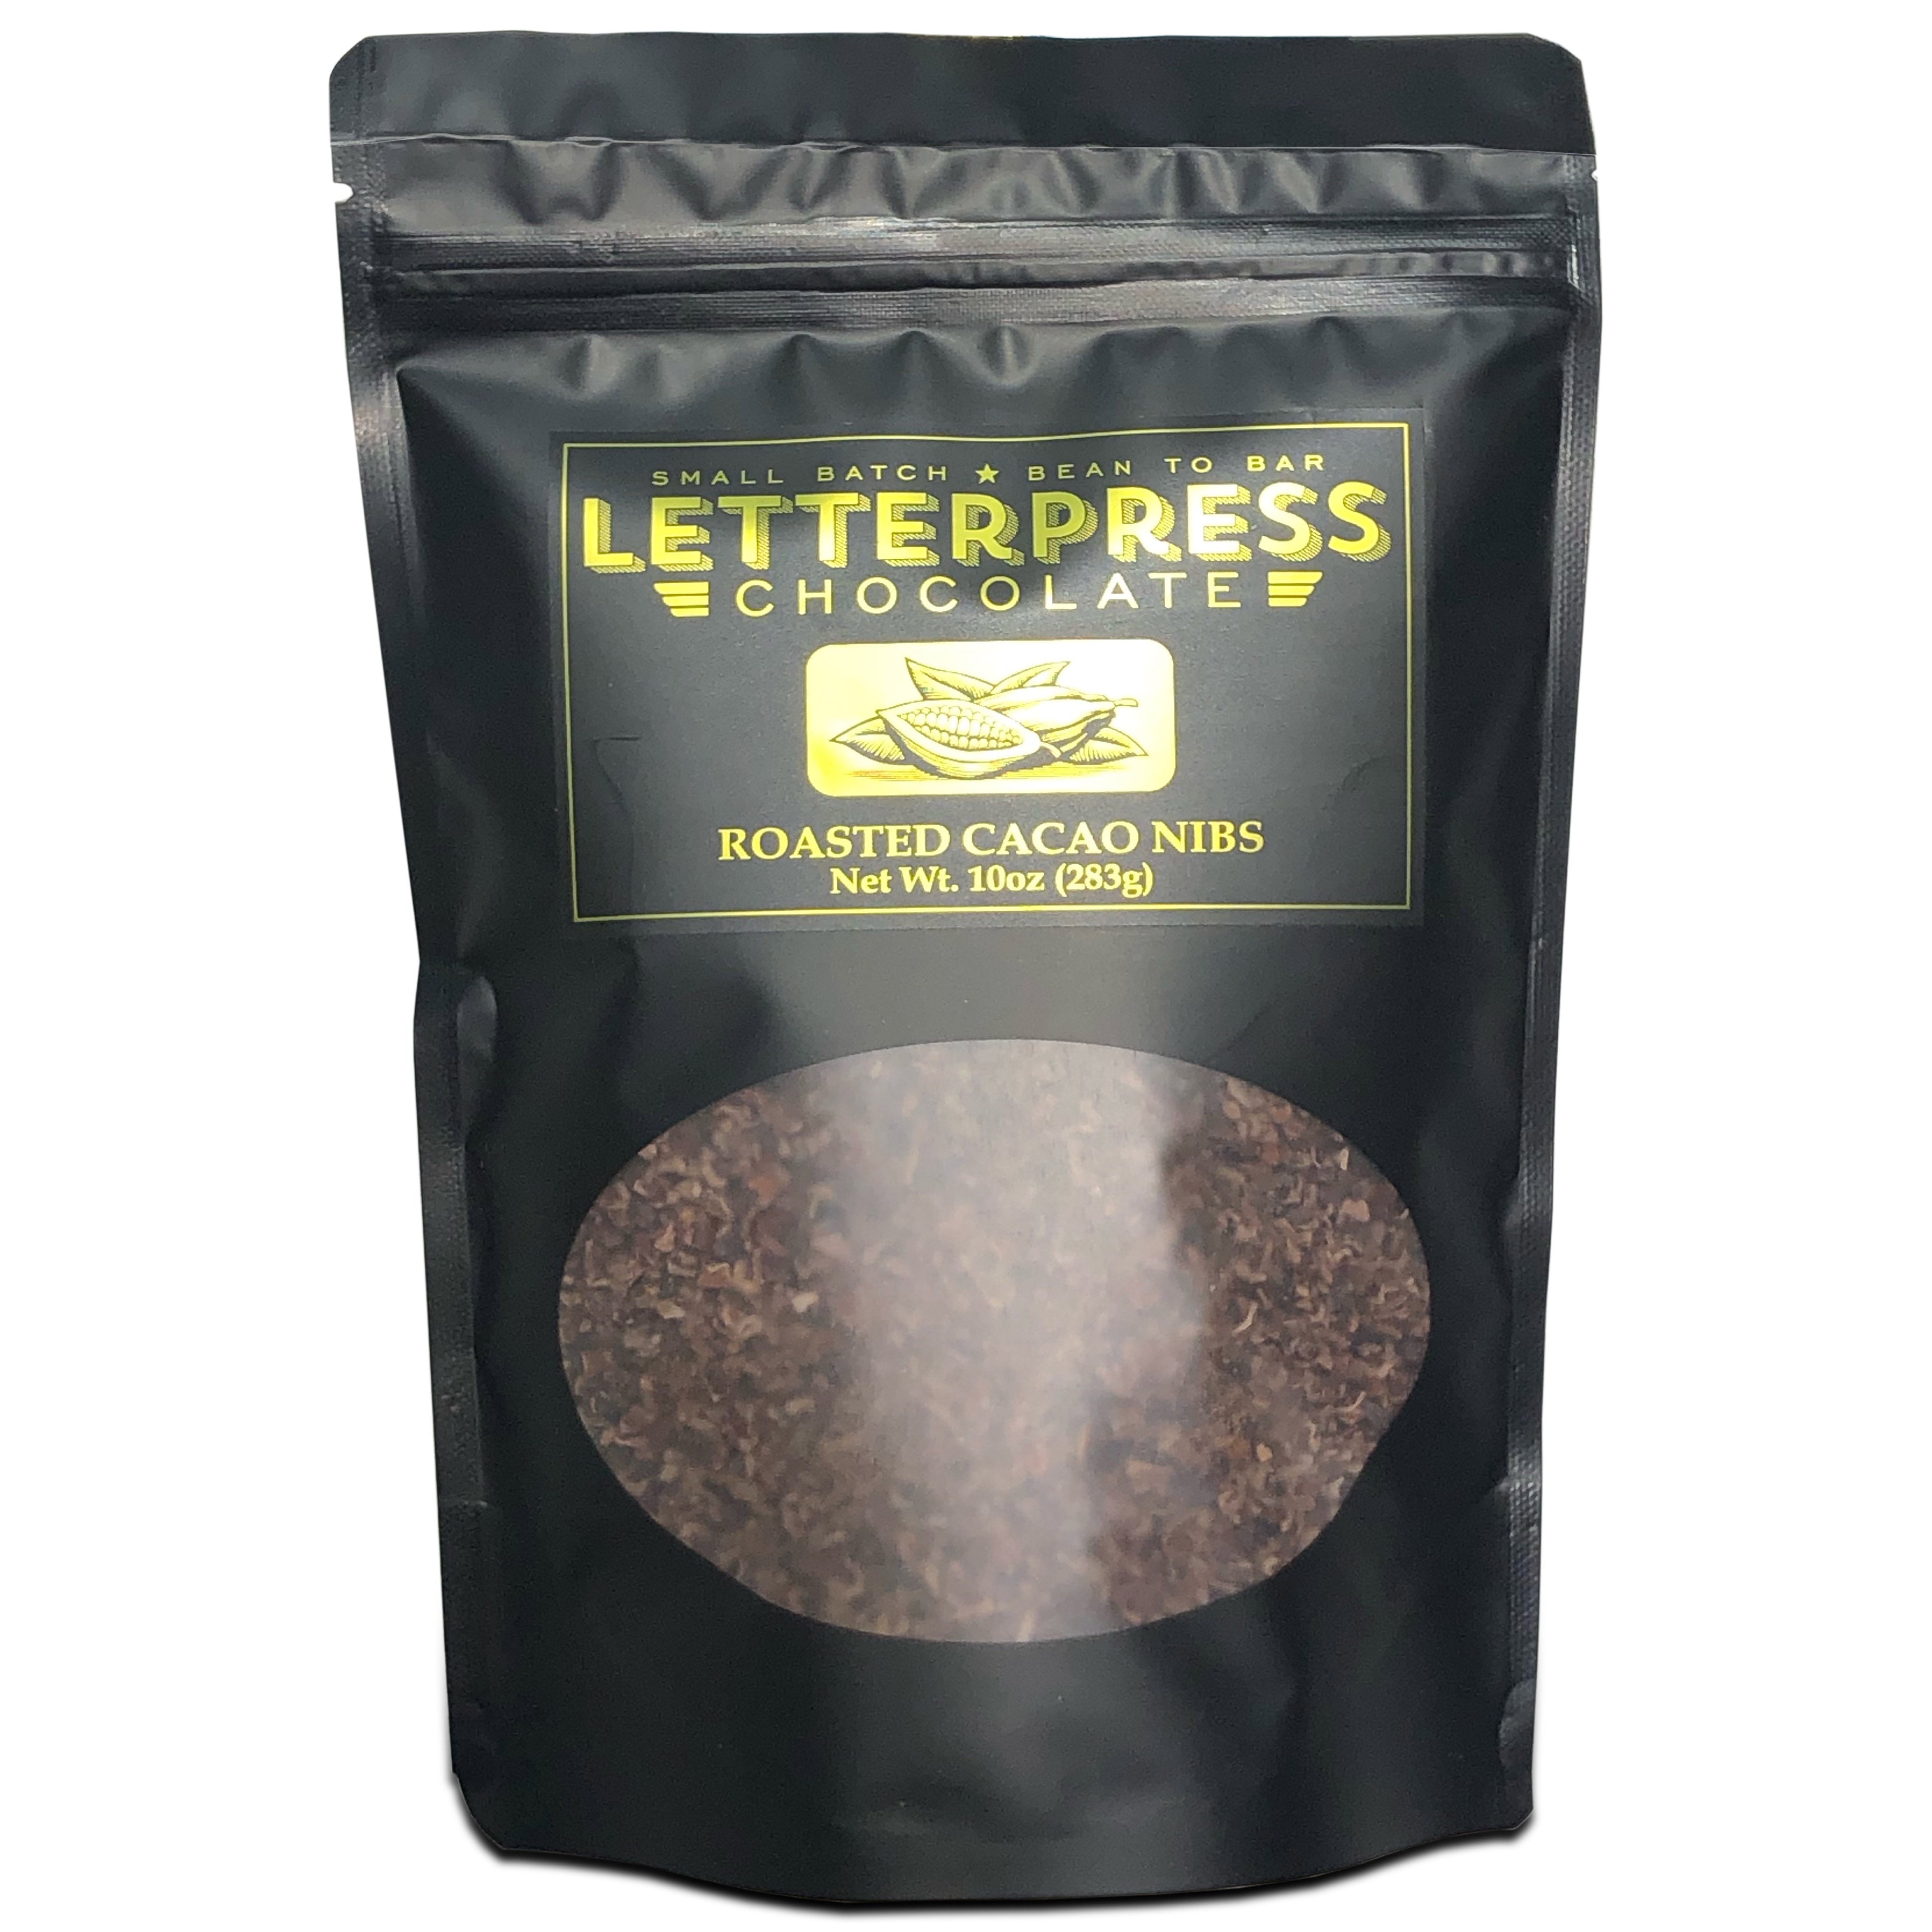 Photo of cacao nibs in black bag with transparent window showing cacao nibs inside